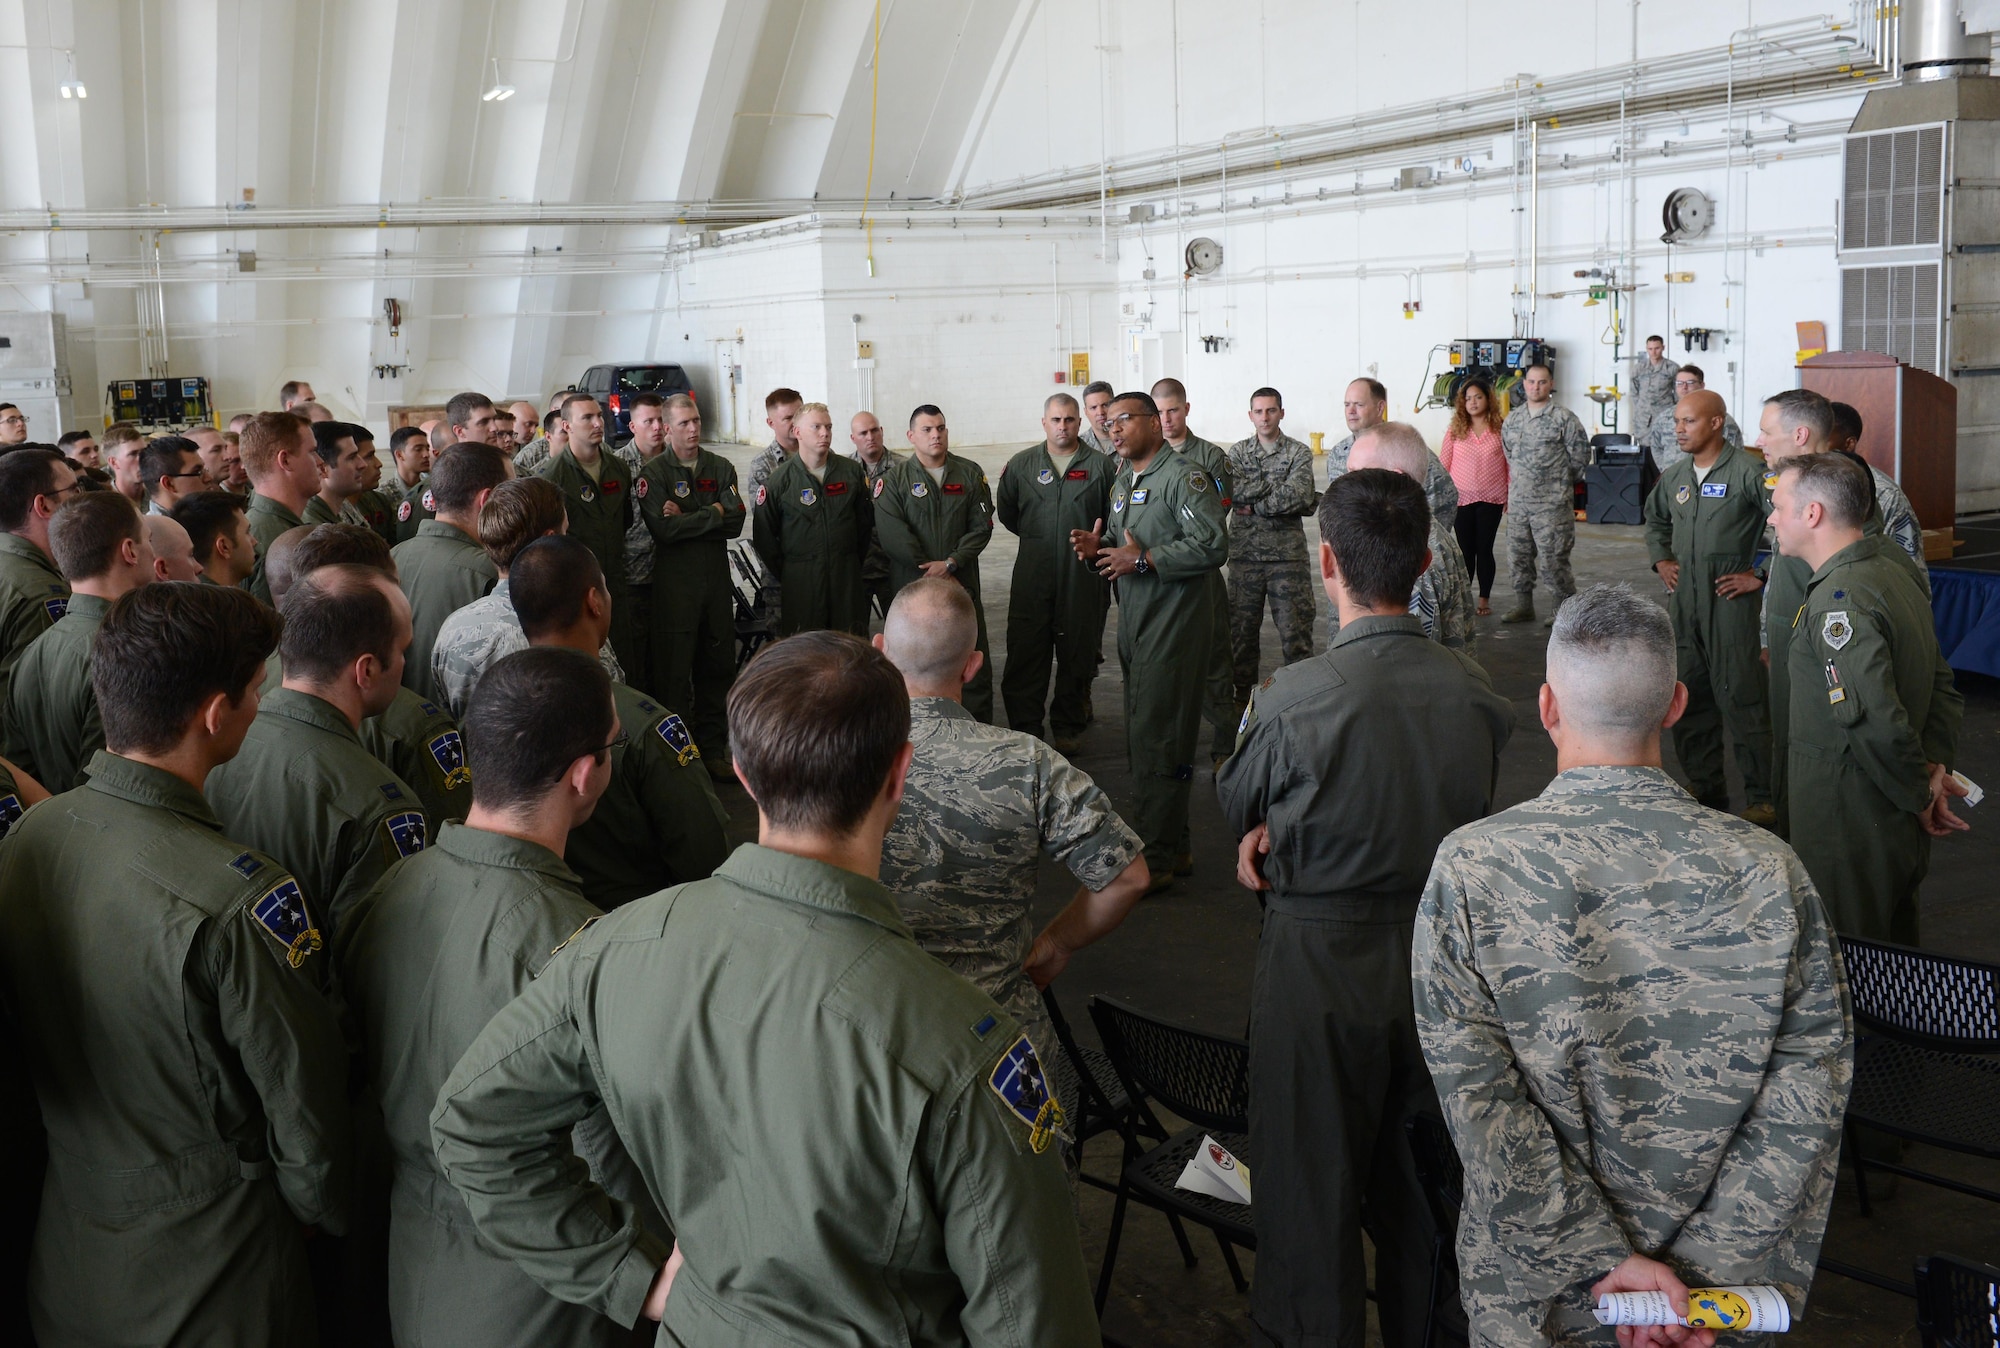 Maj. Gen. Richard Clark, Eighth Air Force commander, speaks to Airmen after a transfer of authority ceremony at Andersen Air Force Base, Guam, Aug. 15, 2016. The ceremony solidified the responsibility of the U.S. Pacific Command’s Continuous Bomber Presence being passed from the 69th EBS from Minot Air Force Base, N.D, to the 34th EBS from Ellsworth Air Force Base, S.D. (U.S. Air Force photo by Airman 1st Class Arielle Vasquez)